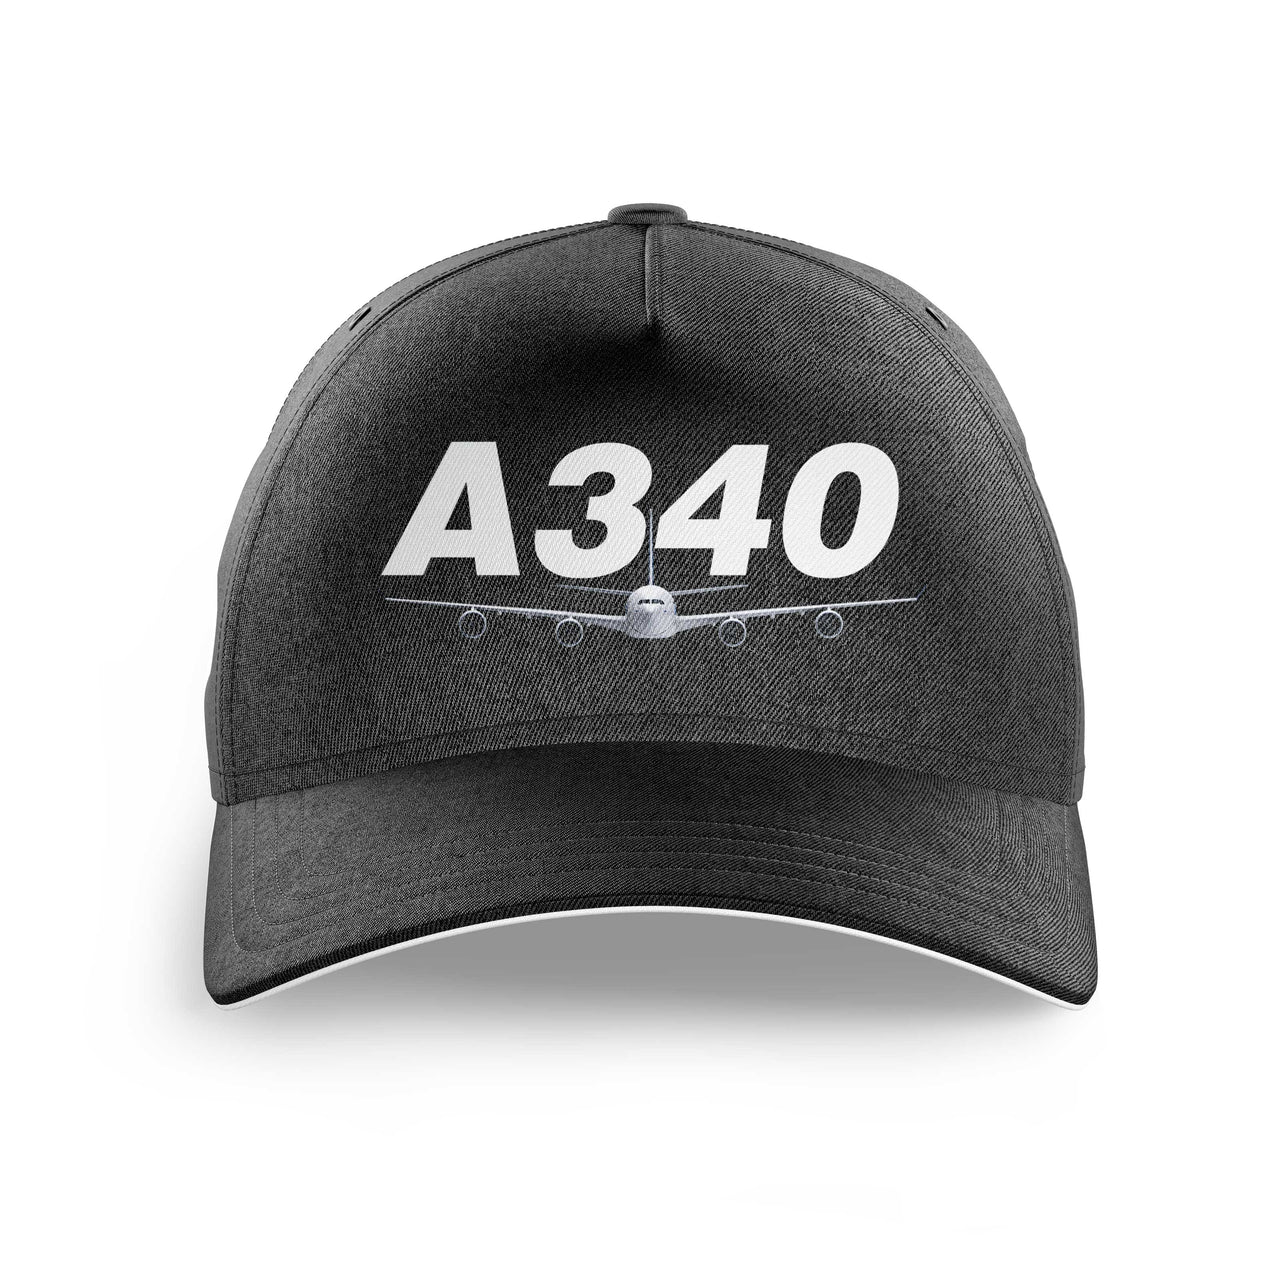 Super Airbus A340 Printed Hats